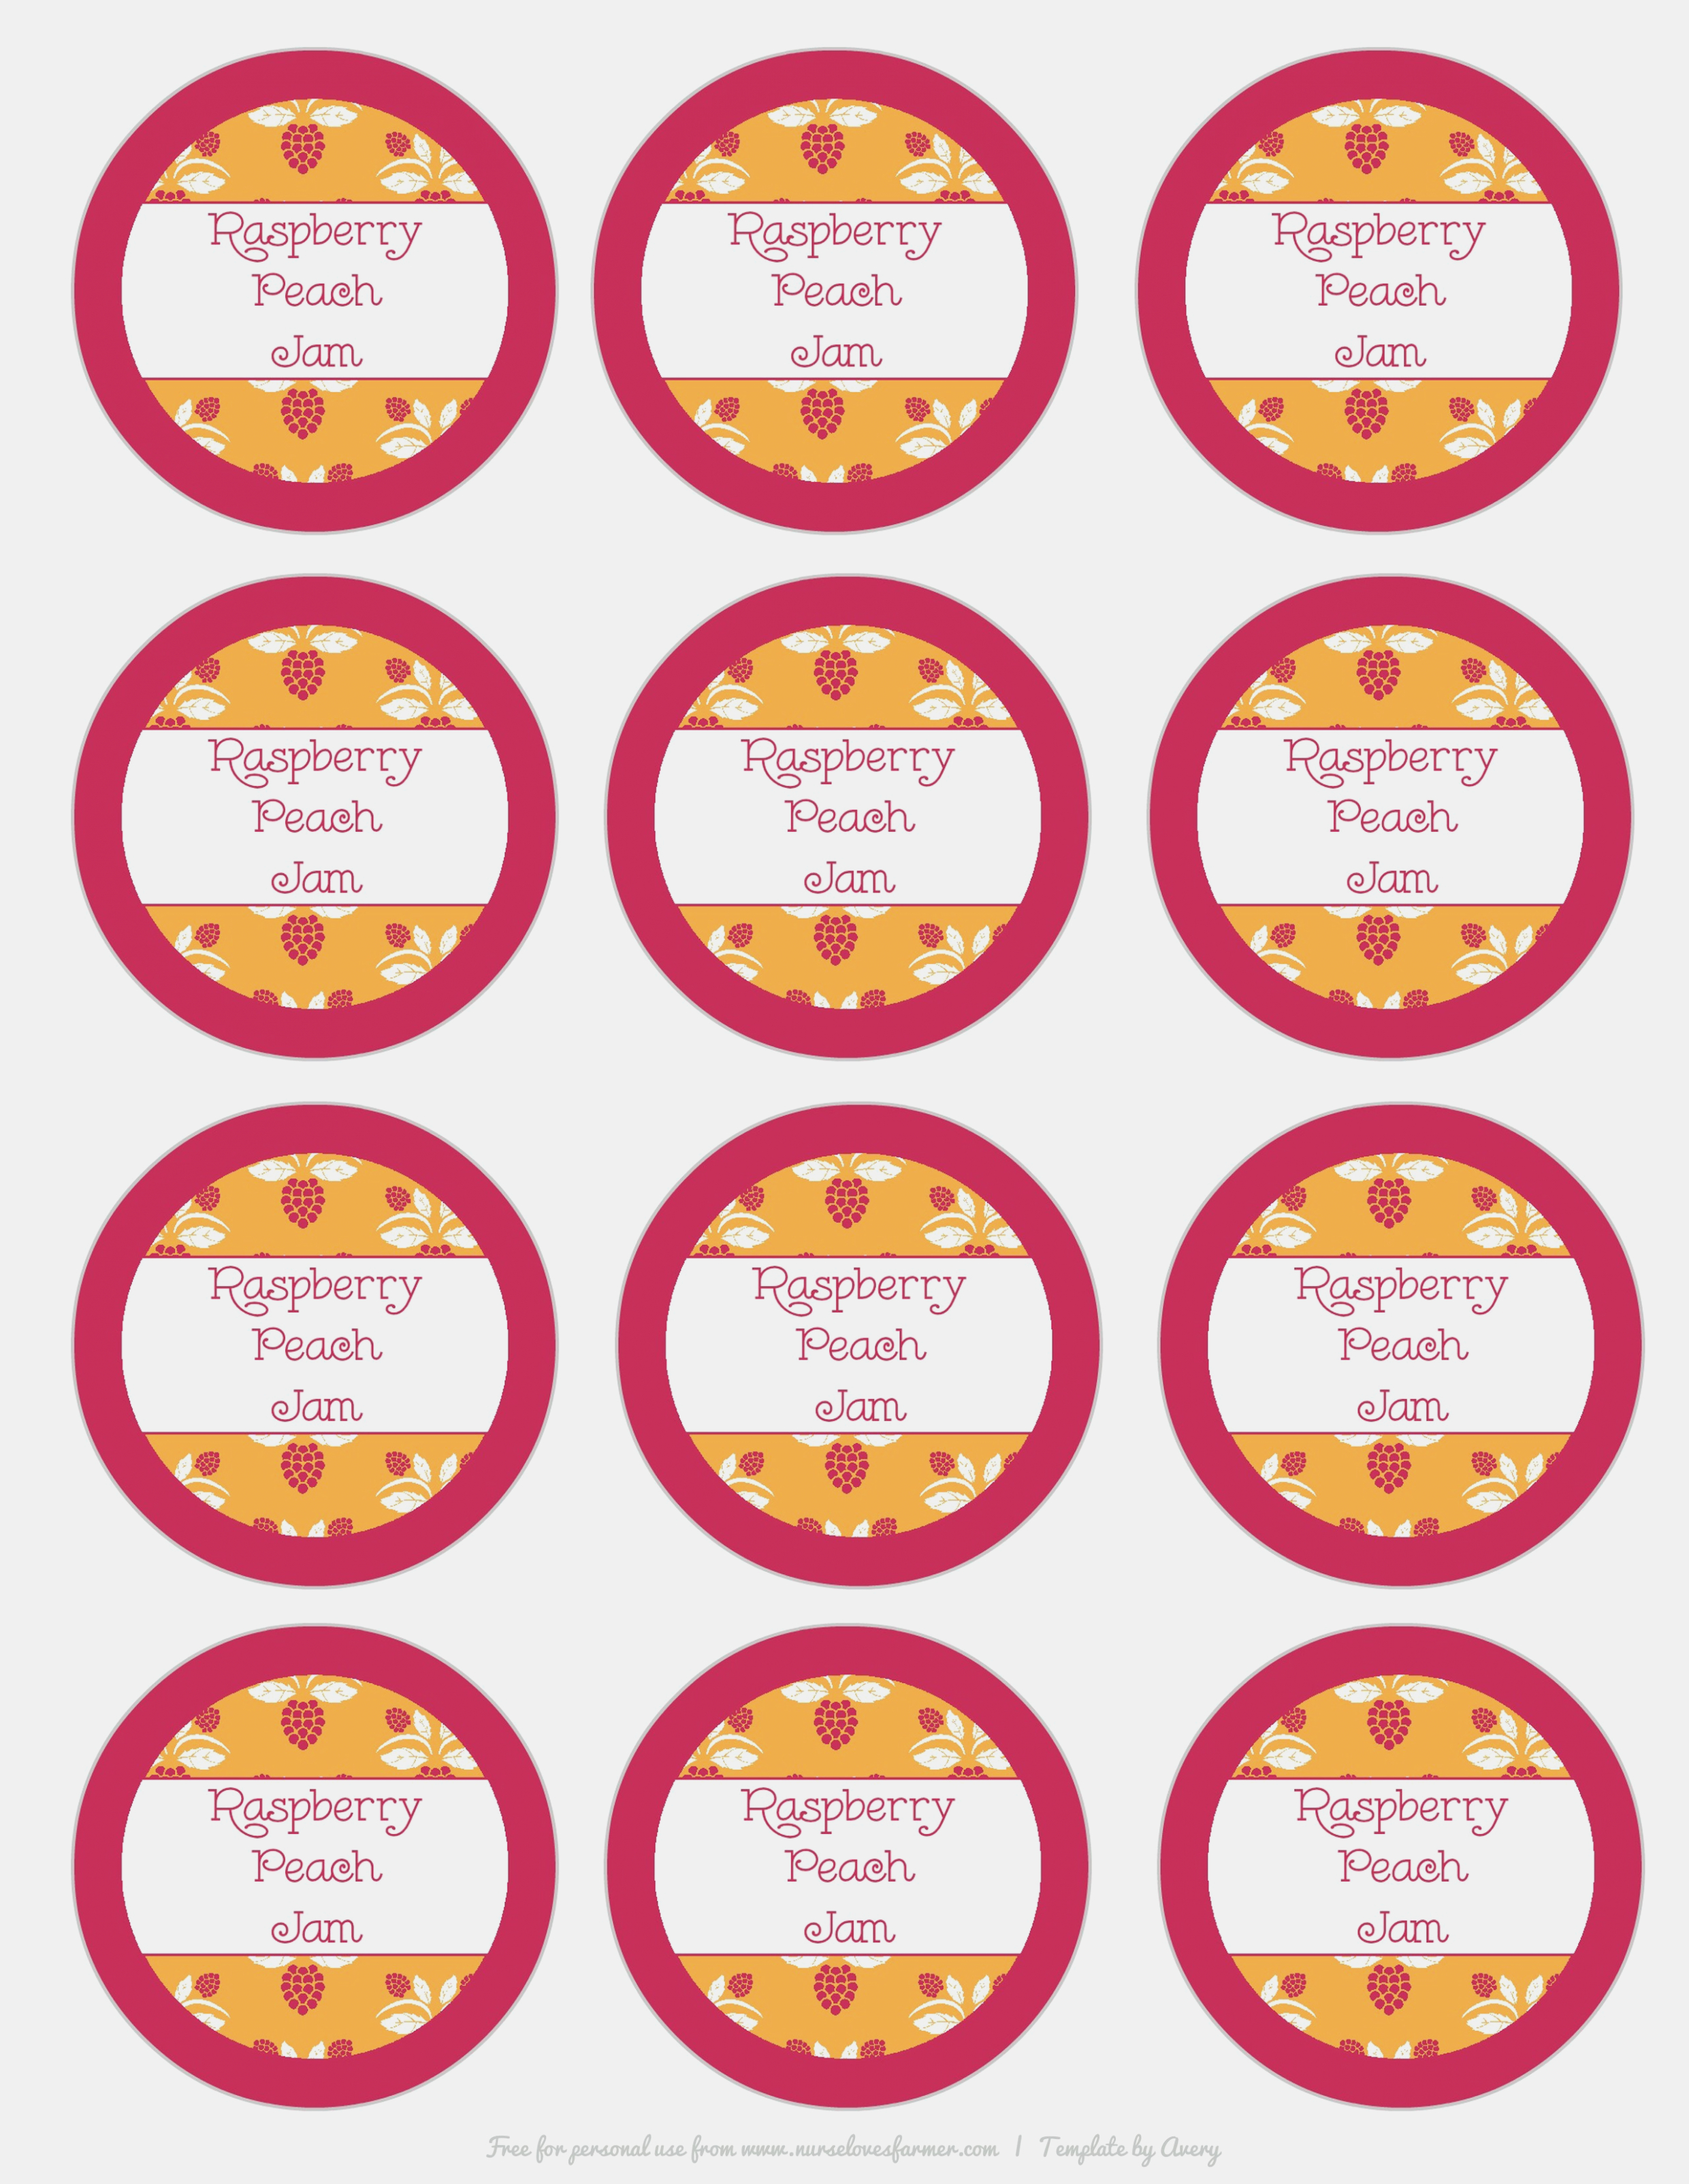 Free Printable Months Of The Year Labels Raspberry Peach Jam Nurse - Free Printable Months Of The Year Labels